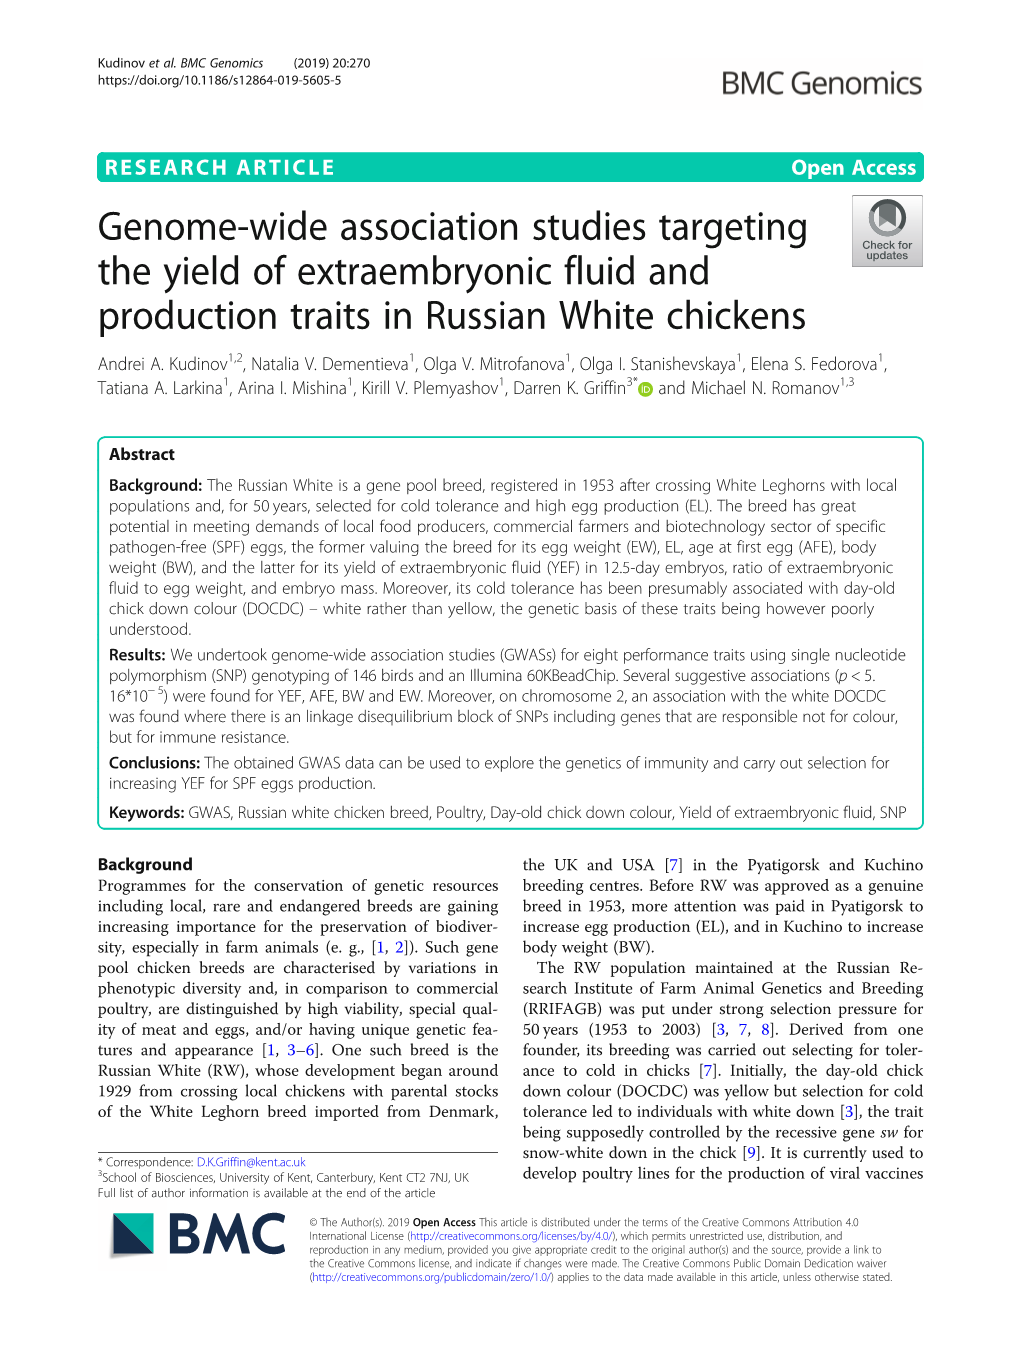 Genome-Wide Association Studies Targeting the Yield of Extraembryonic Fluid and Production Traits in Russian White Chickens Andrei A